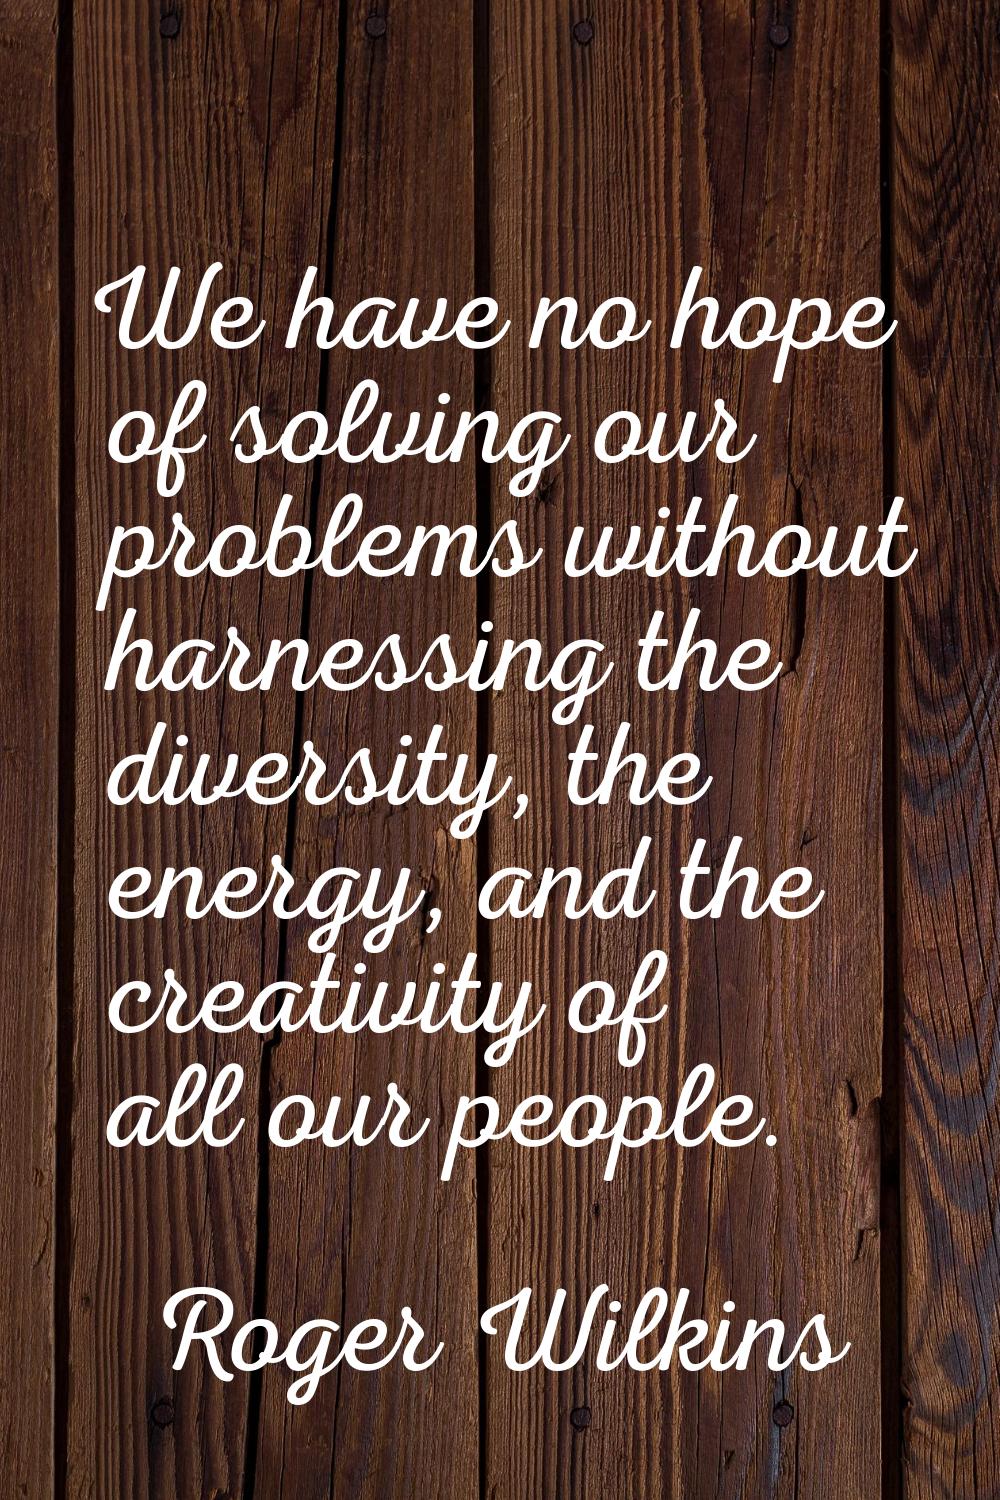 We have no hope of solving our problems without harnessing the diversity, the energy, and the creat